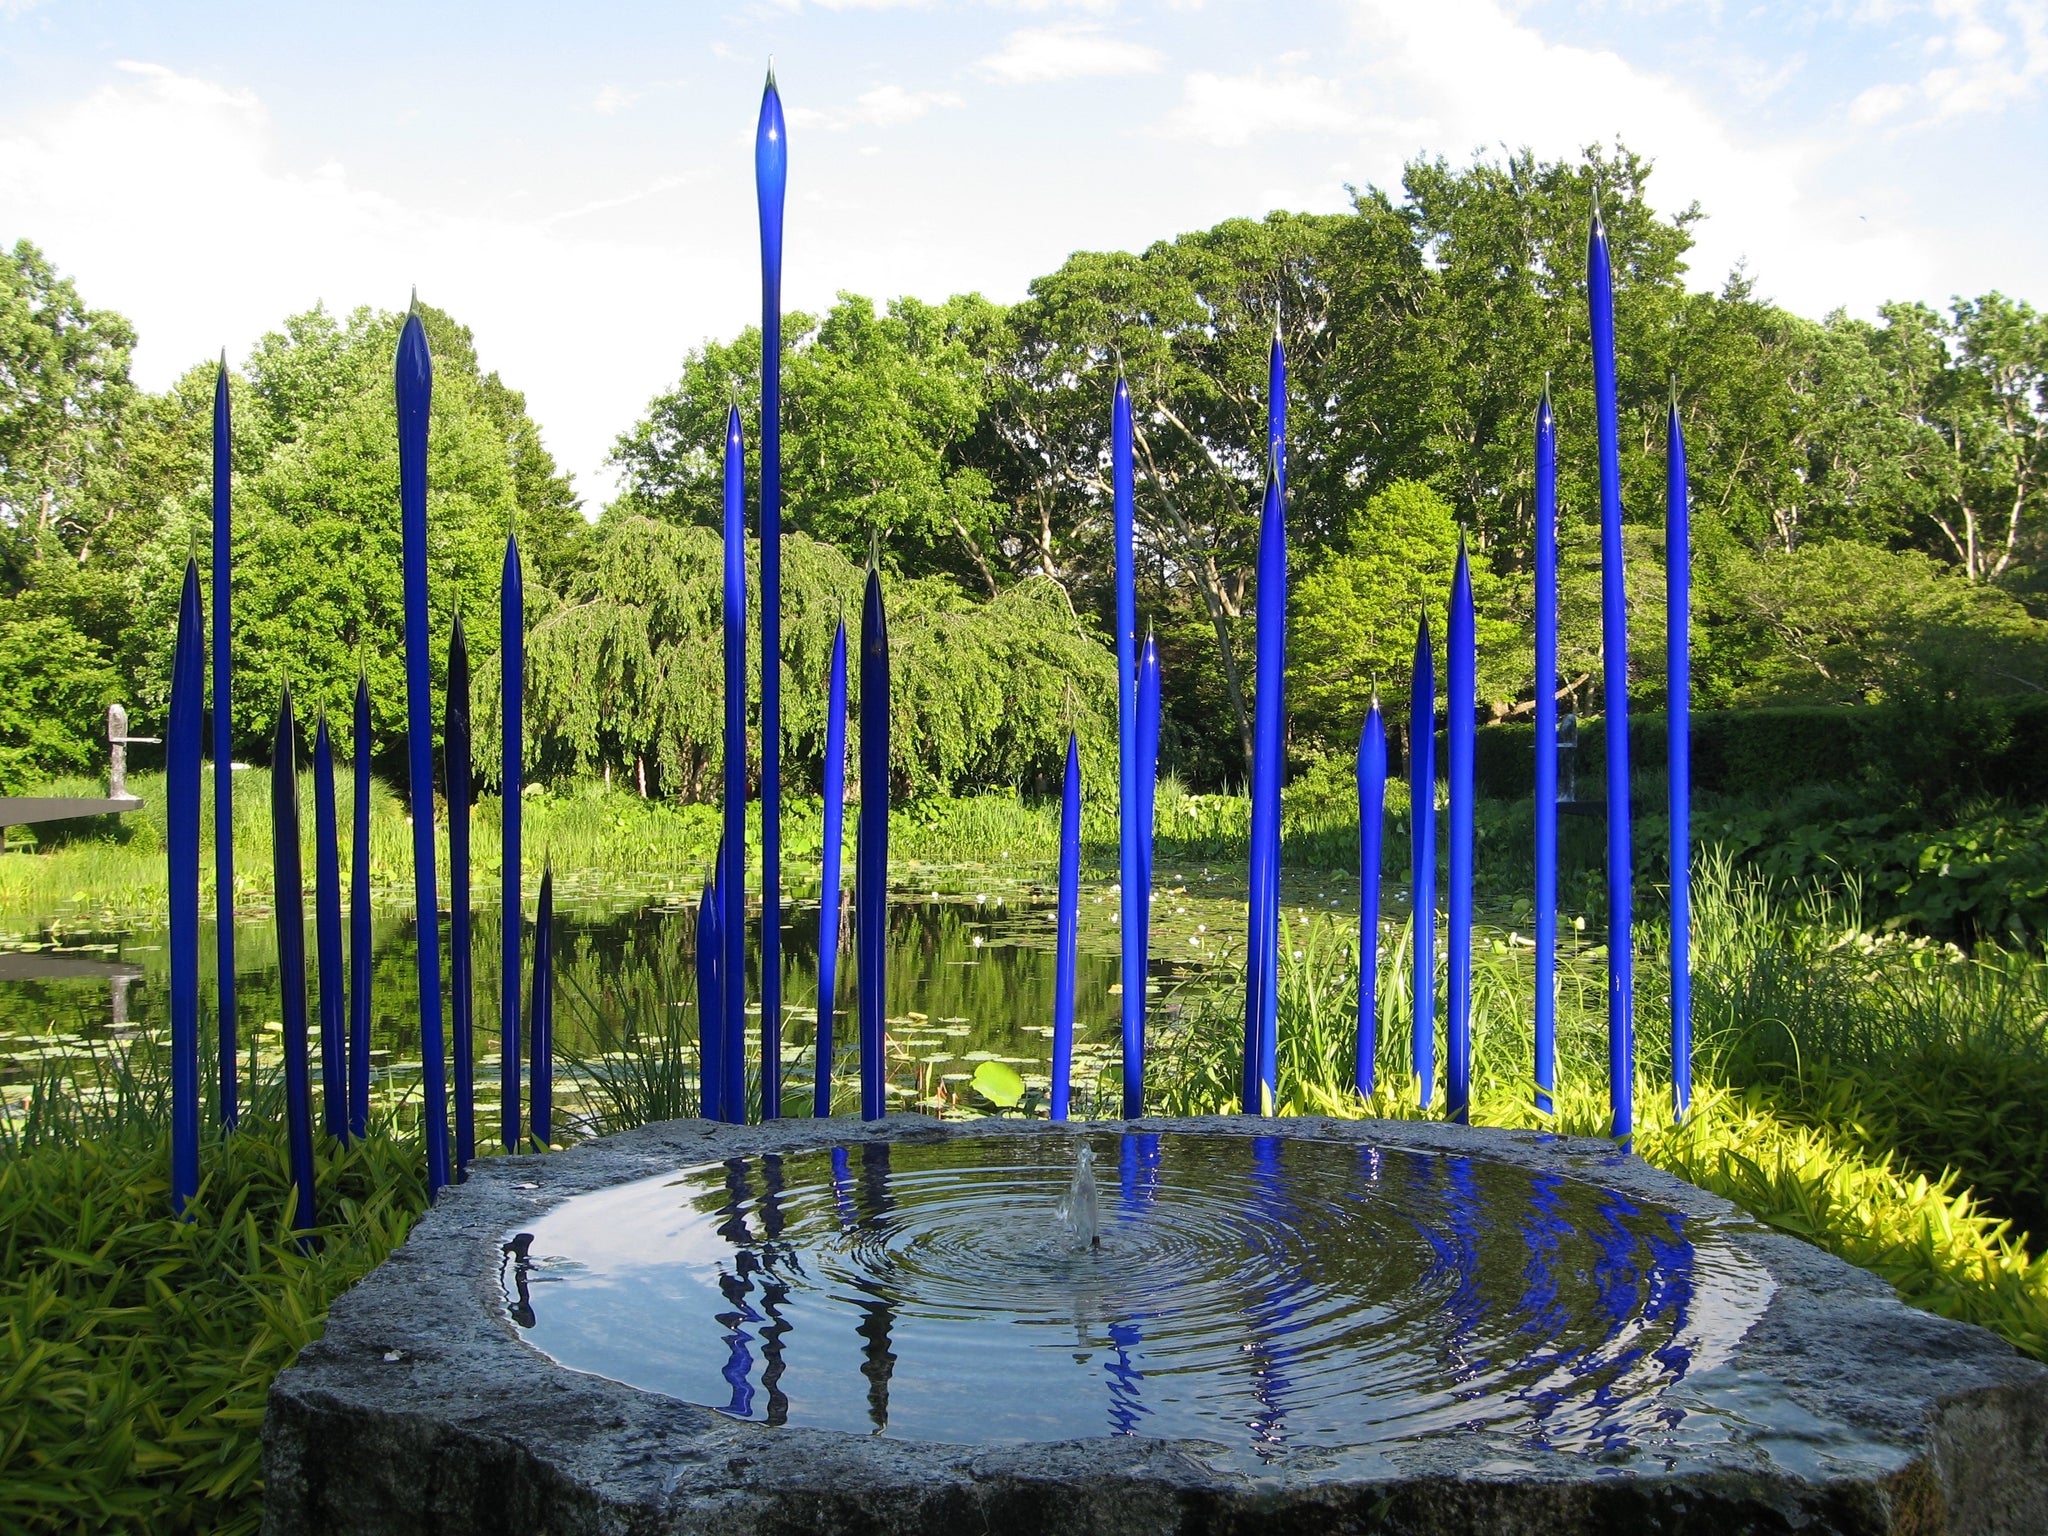 The Dale Chihuly Cobalt Reeds